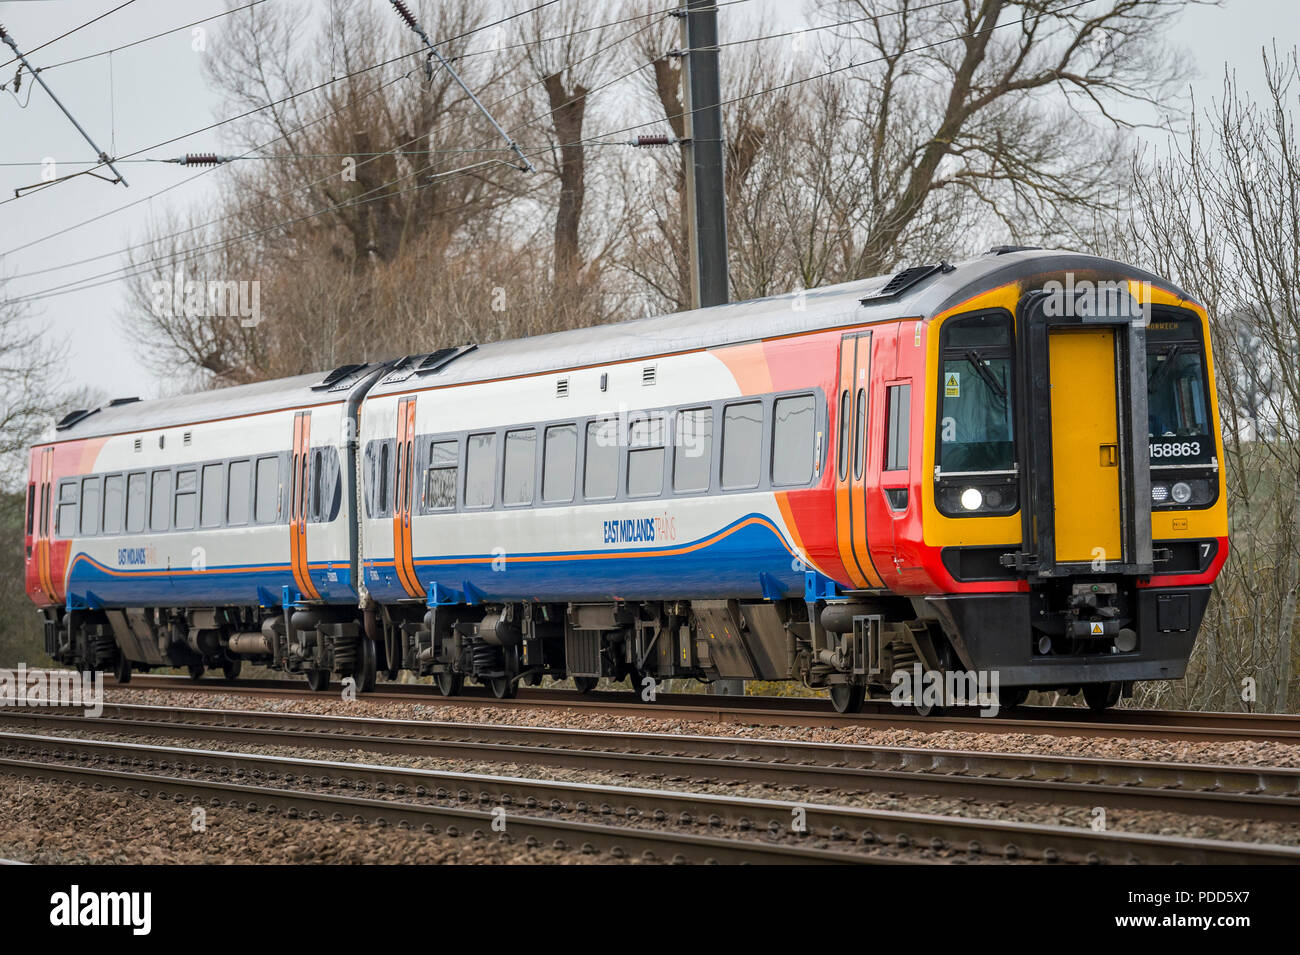 Class 158 train in East Midlands Trains livery travelling through the English countryside. Stock Photo